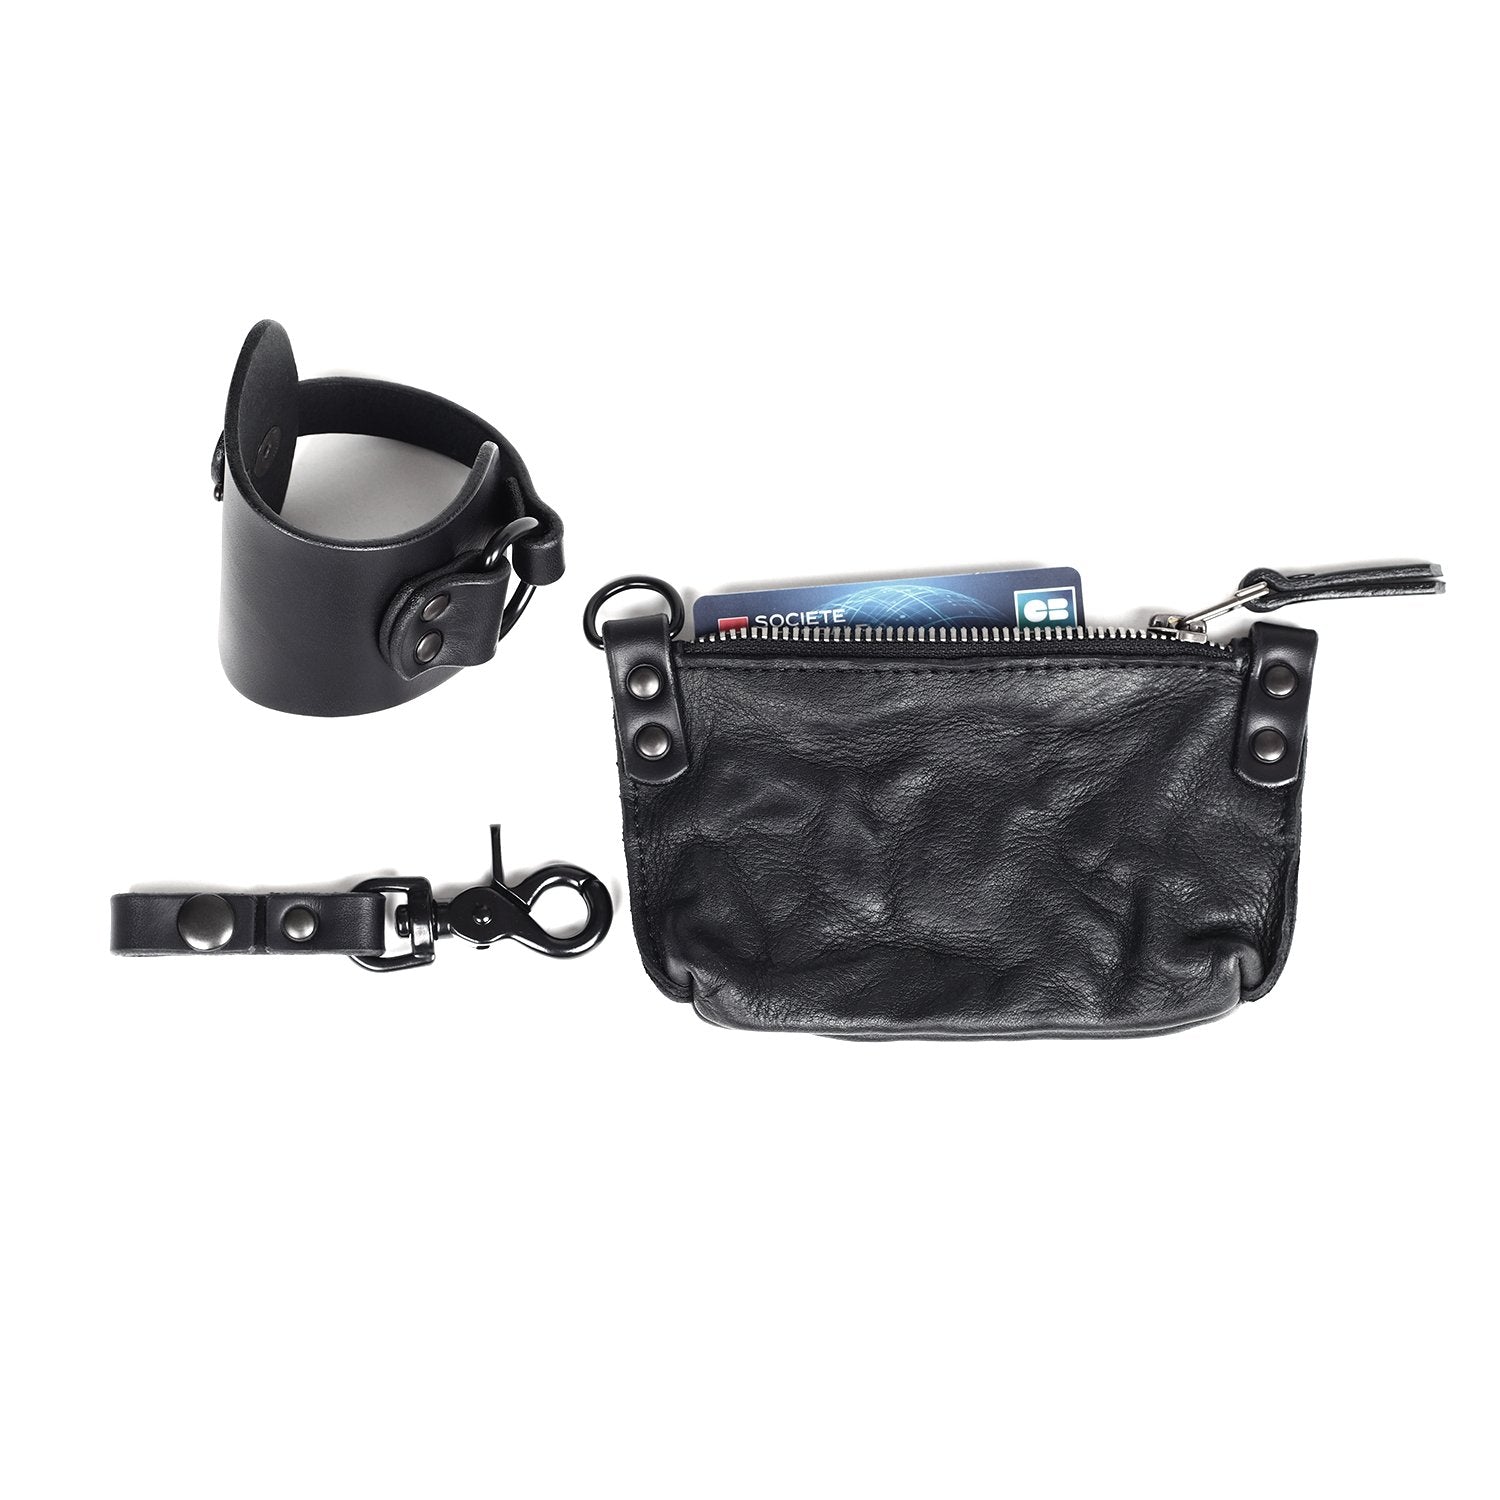 A3TEPHRA 923BLACKAccessorize in style with our versatile black cuff purse, handmade with the highest quality vegetable tanned cow leather. The adjustable length and detachable keychaAccessori UnisexLA HAINE INSIDE USTEPHRAA3TEPHRA 923BLACK